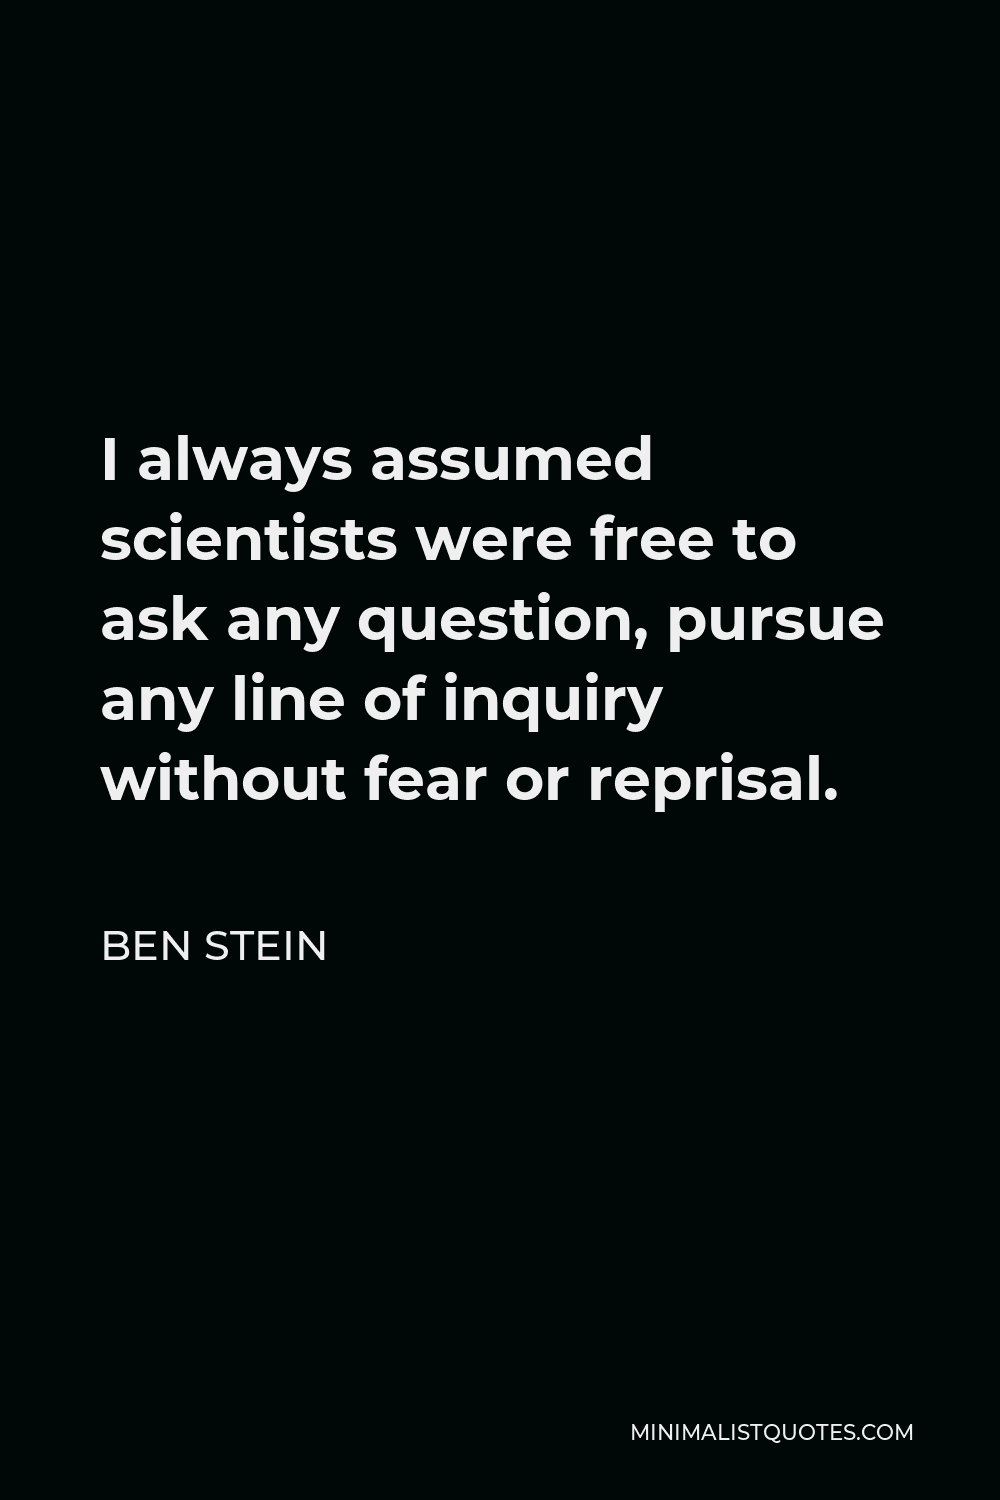 Ben Stein Quote - I always assumed scientists were free to ask any question, pursue any line of inquiry without fear or reprisal.